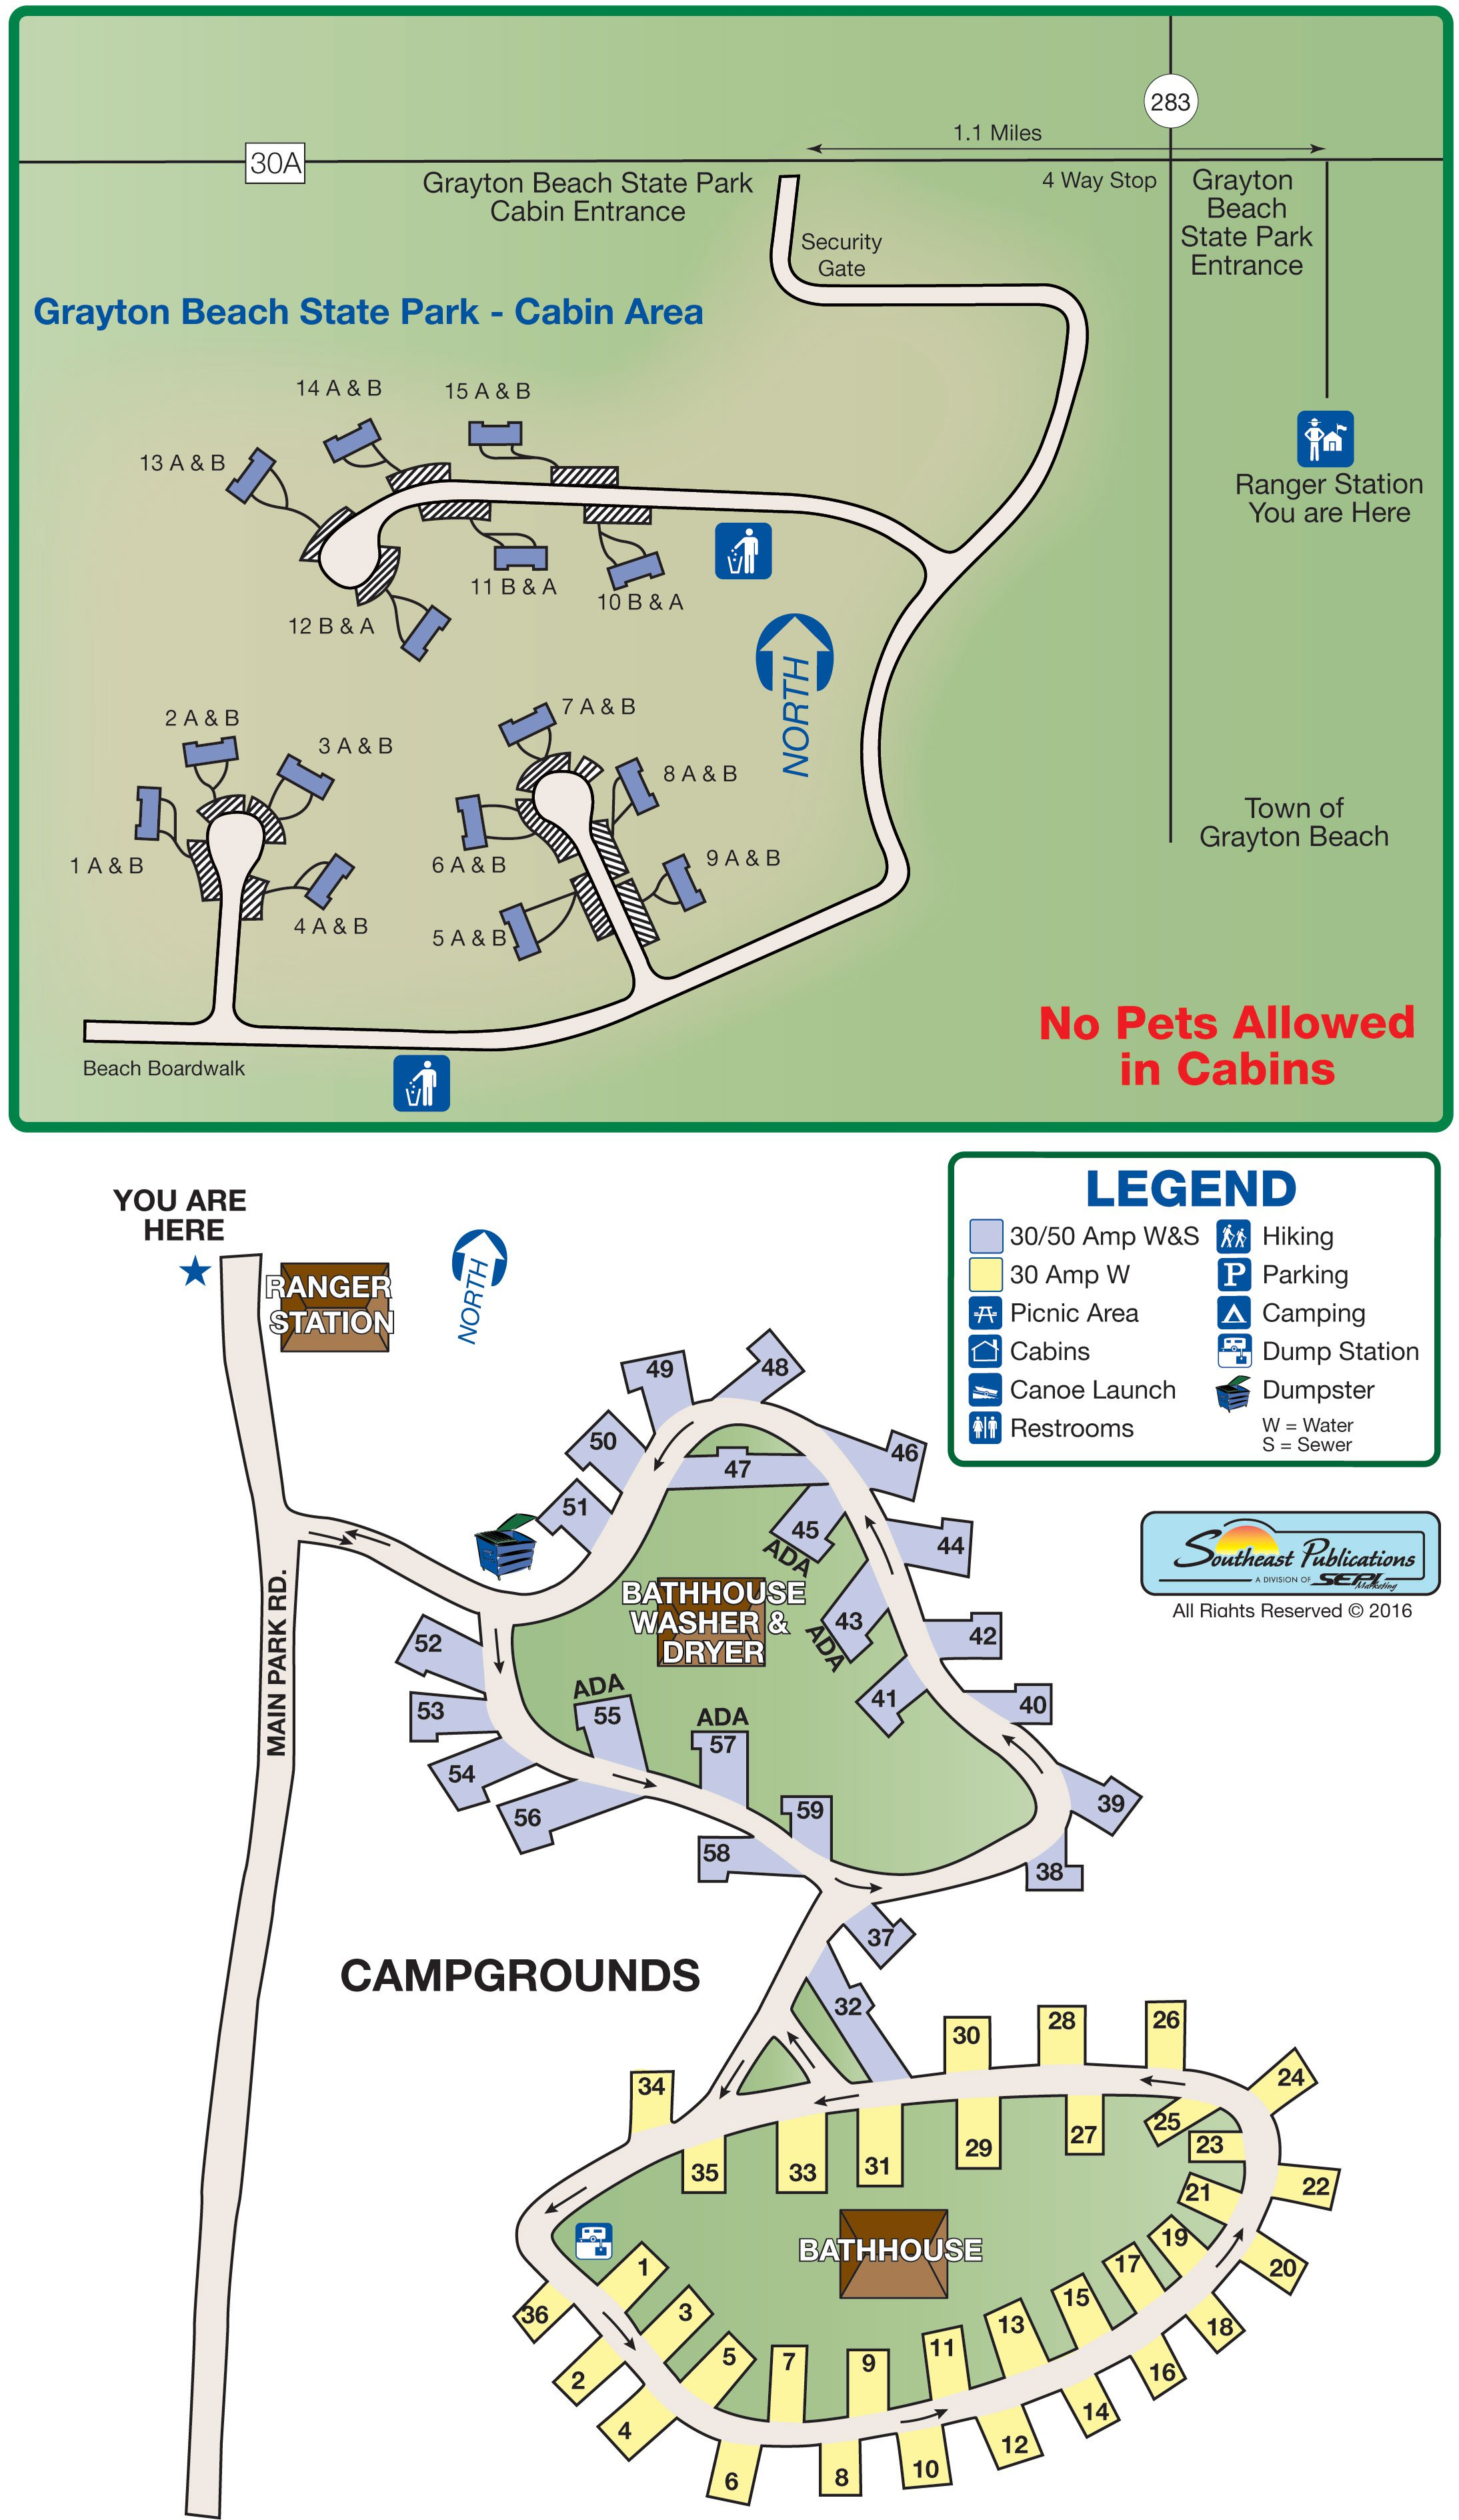 Florida State Parks Rv Camping - Know Your Campground - Florida State Park Campgrounds Map